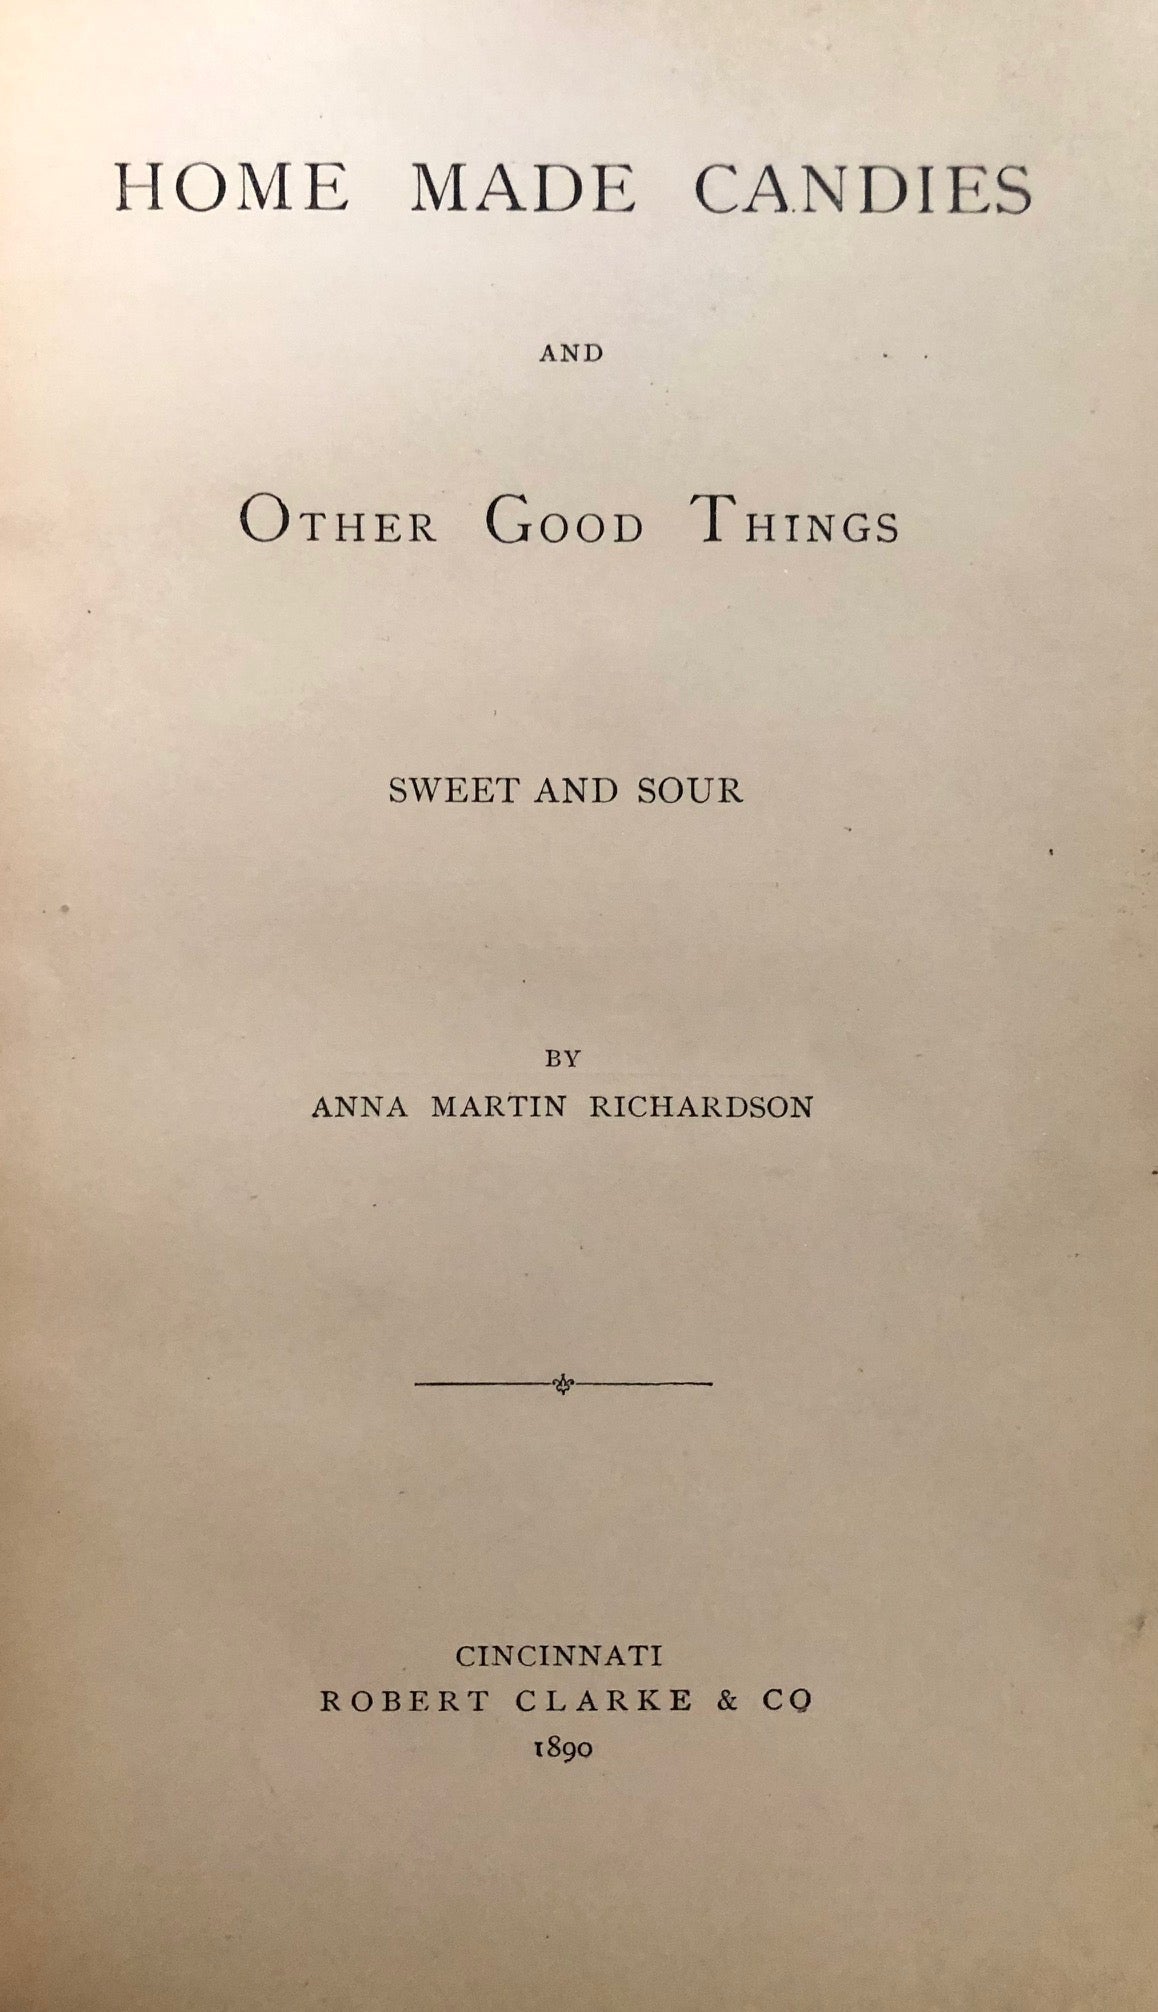 (Confectionery) Anna Martin Richardson. Home Made Candies and Other Good Things Sweet and Sour.